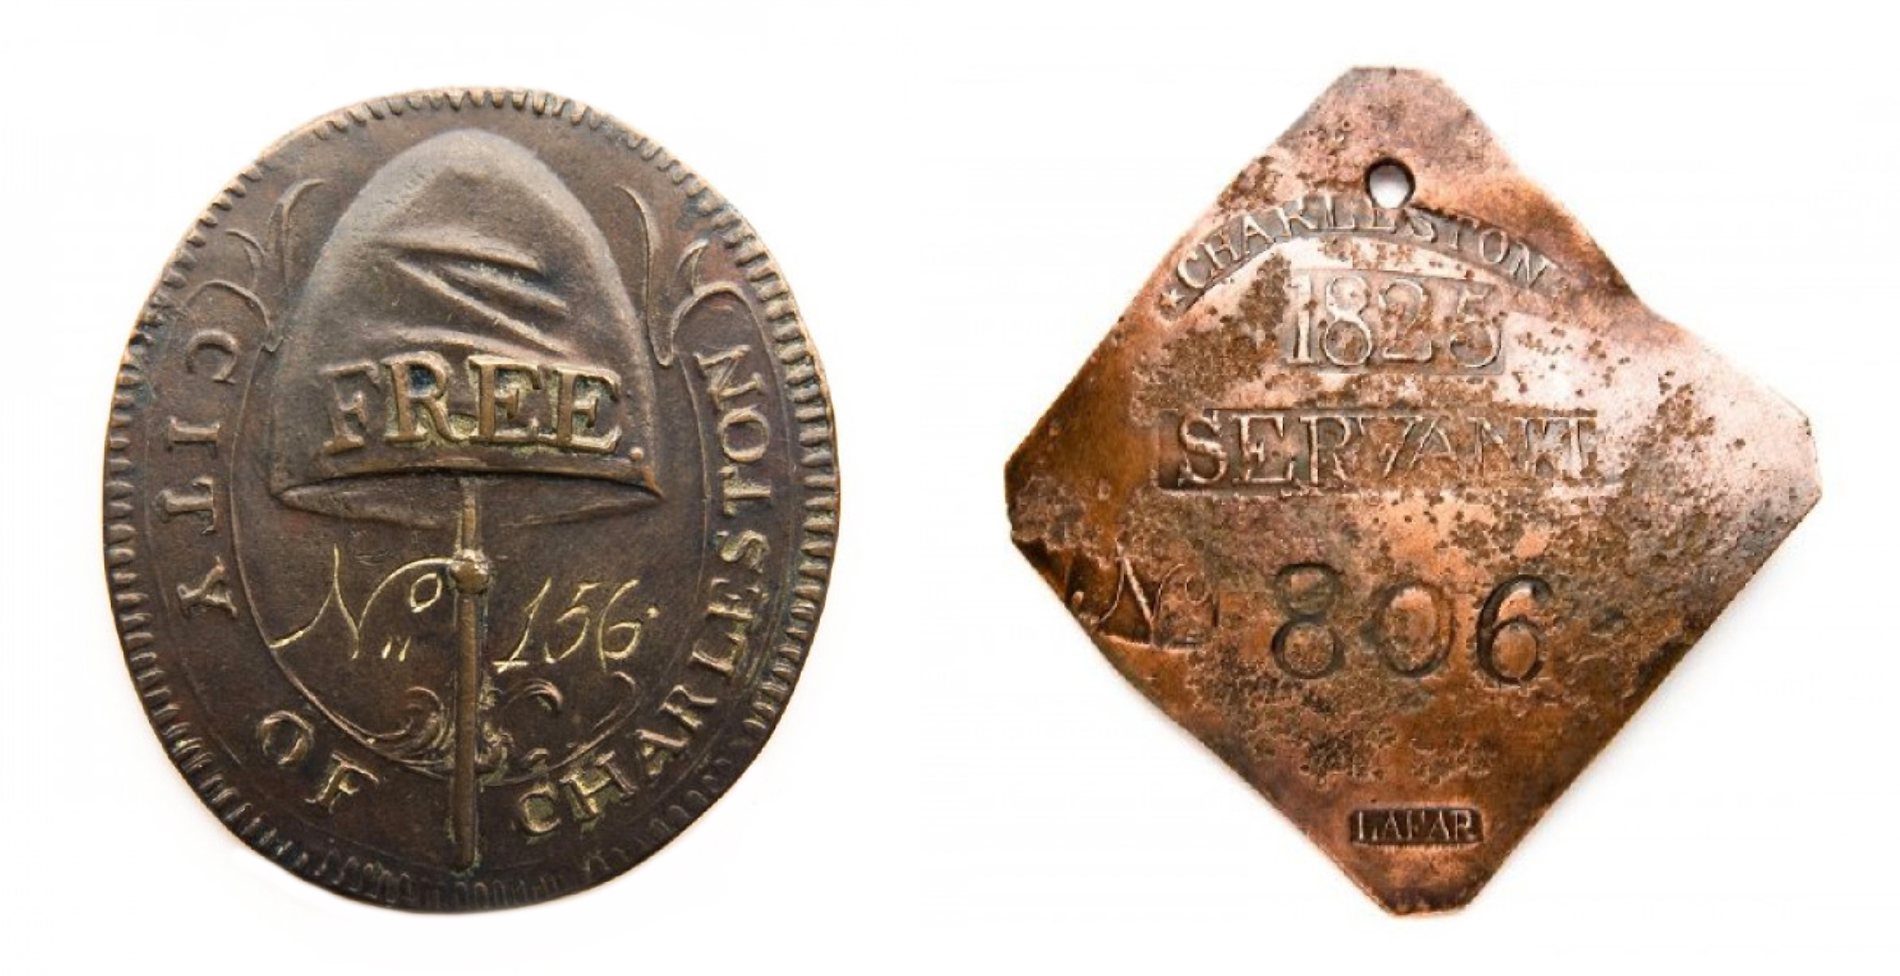 Two badges worn by people of African descent in Charleston, South Carolina. The badge on the left was issued to a free person of color during the 1780s. The badge on the right was issued to an enslaved person (“servant” was a euphemism for slave) in 1824. Left: Free badge, 1783–89, copper, 1.457 x 1.614 inches (The Charleston Museum); Right: Slave badge, 1825, copper, 2.717 x 2.559 inches (The Charleston Museum)